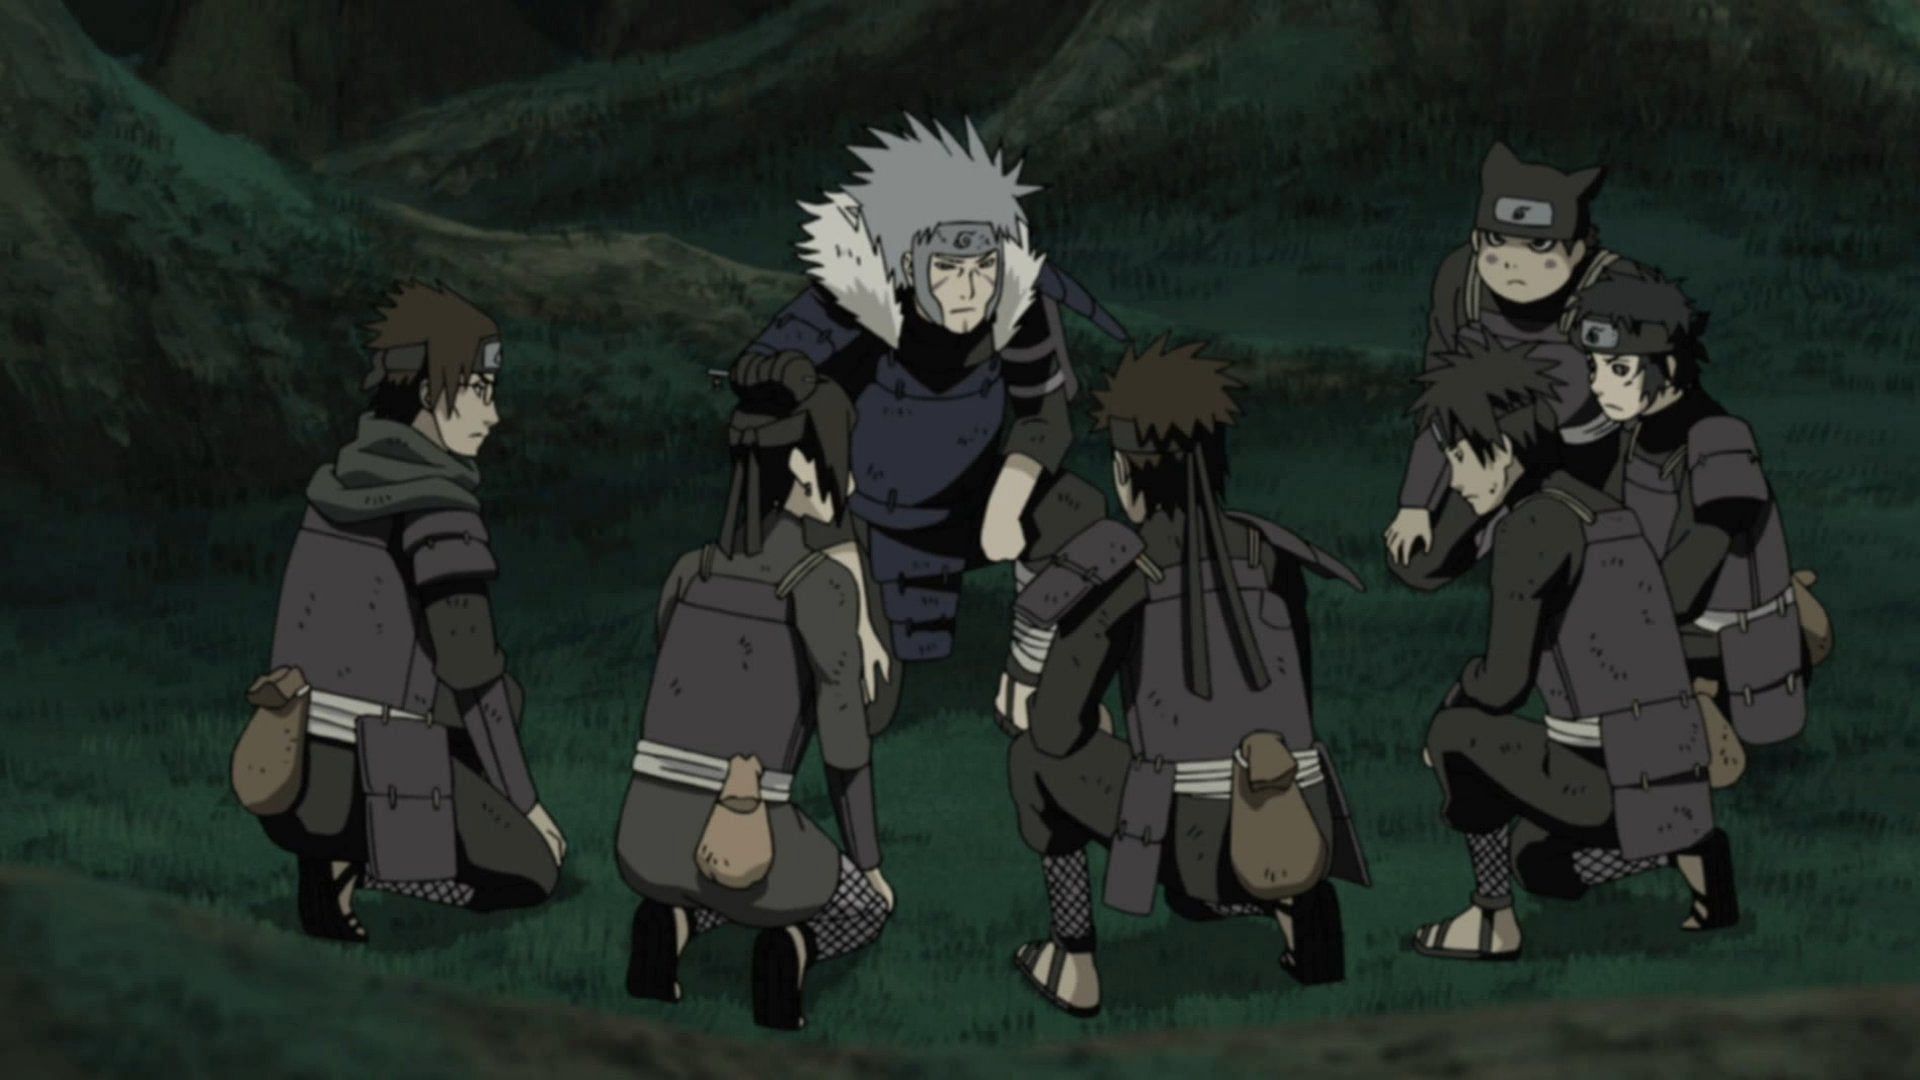 Scene from Naruto and the Fourth Ninja War Arc. Can you tell who the main character of this scene is?